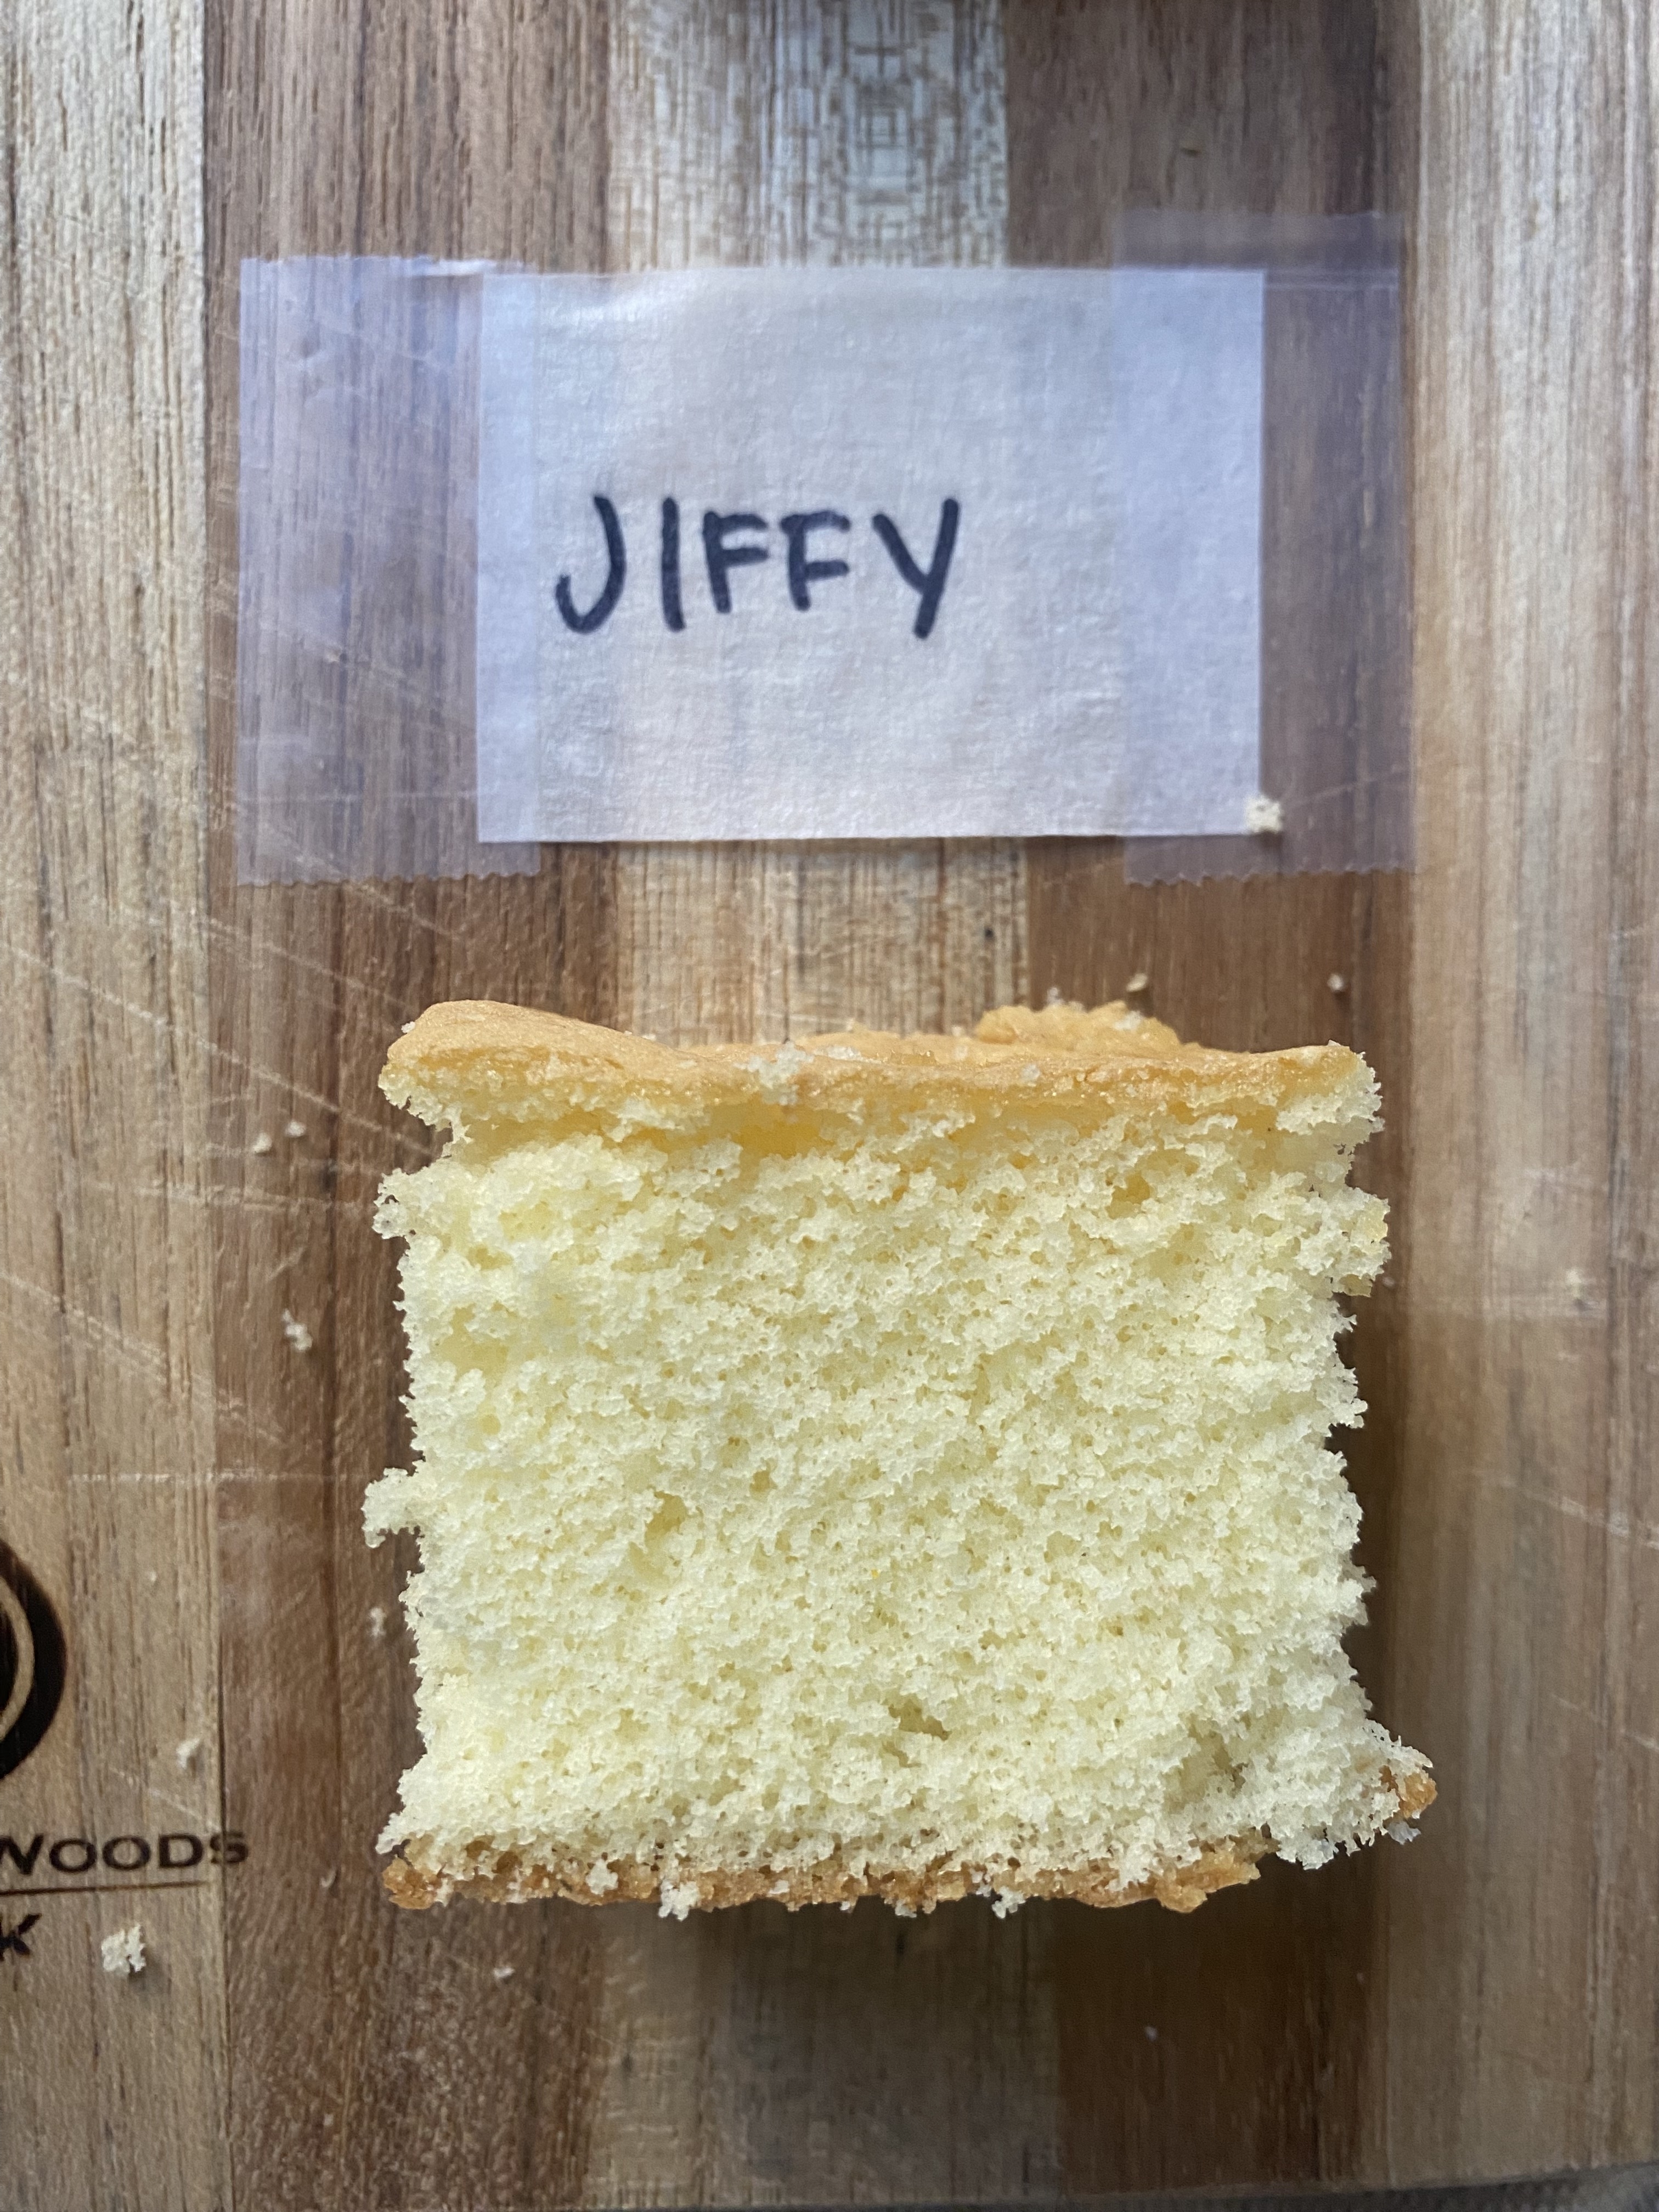 a close-up of a piece of jiffy cake on a cutting board